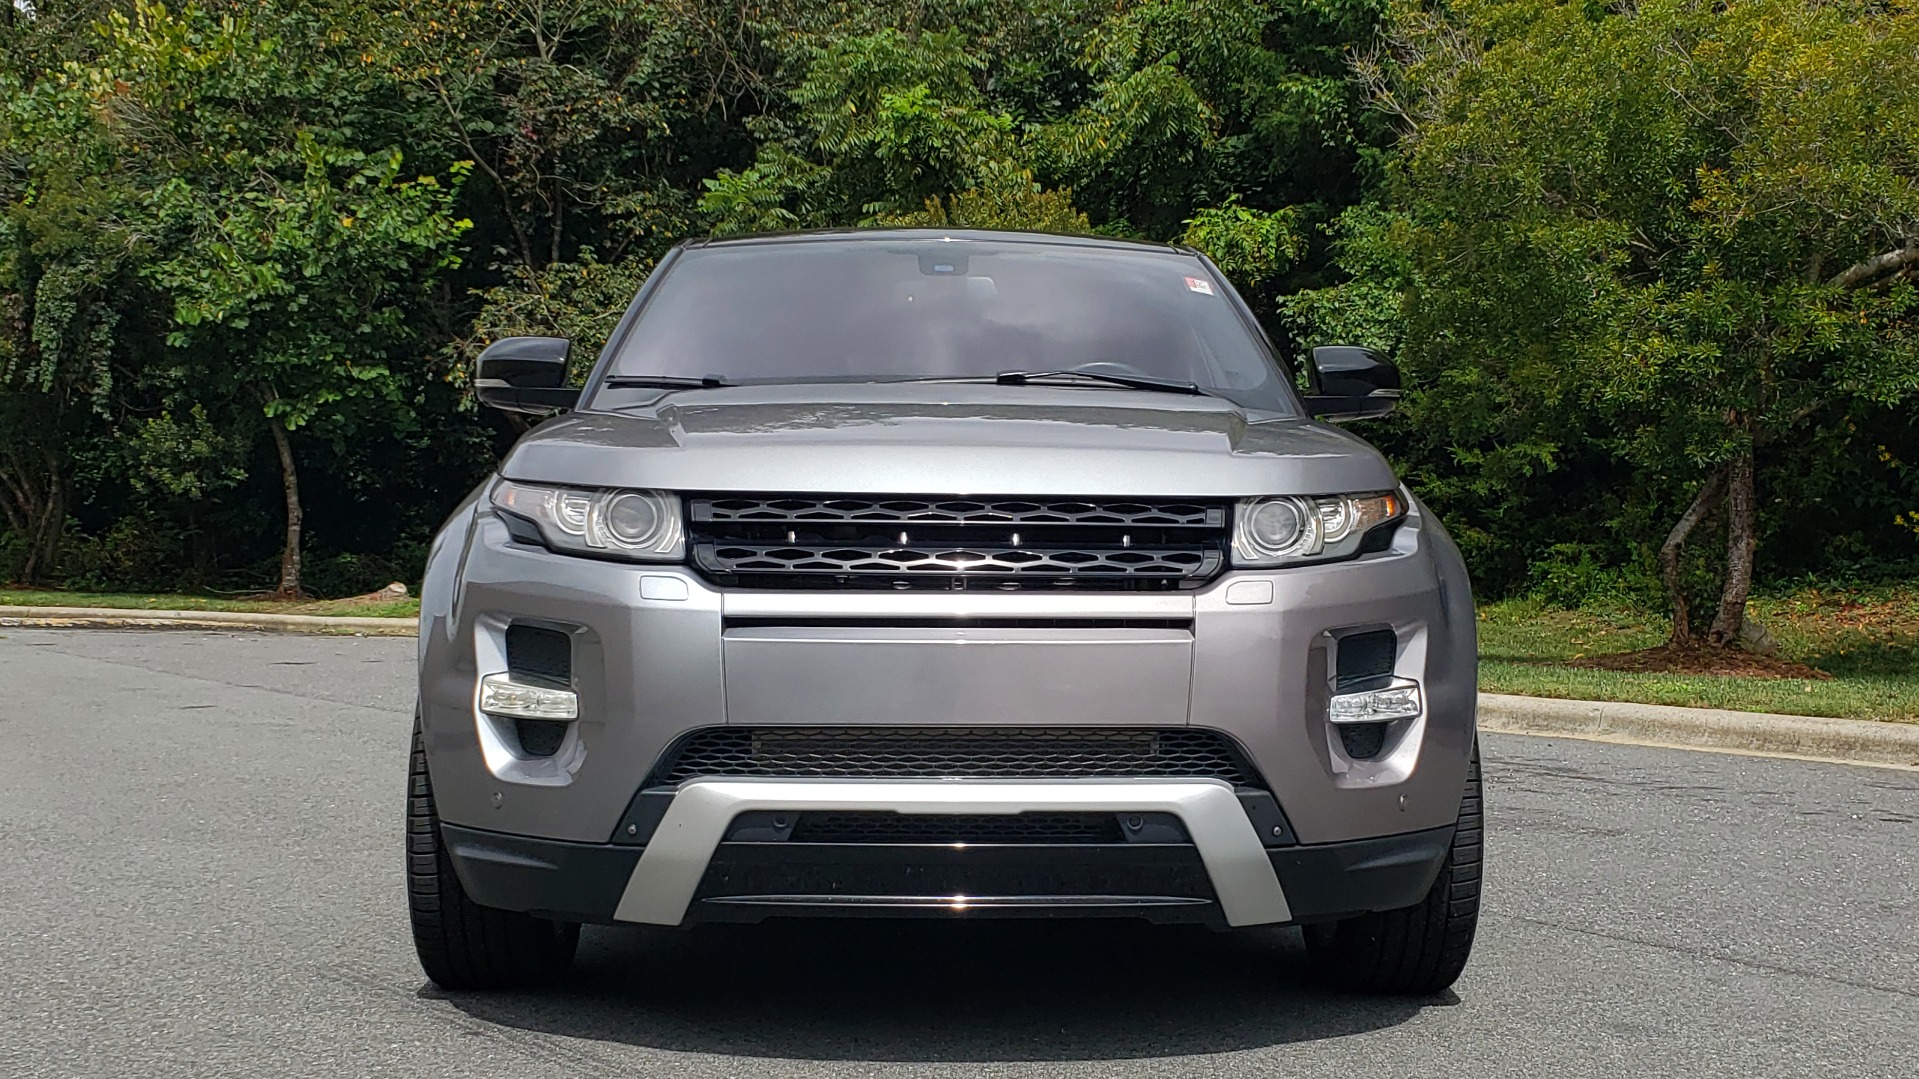 Used 2013 Land Rover RANGE ROVER EVOQUE DYNAMIC PREMIUM / NAV / PANO-ROOF / BLIND SPOT / REARVIEW for sale Sold at Formula Imports in Charlotte NC 28227 25